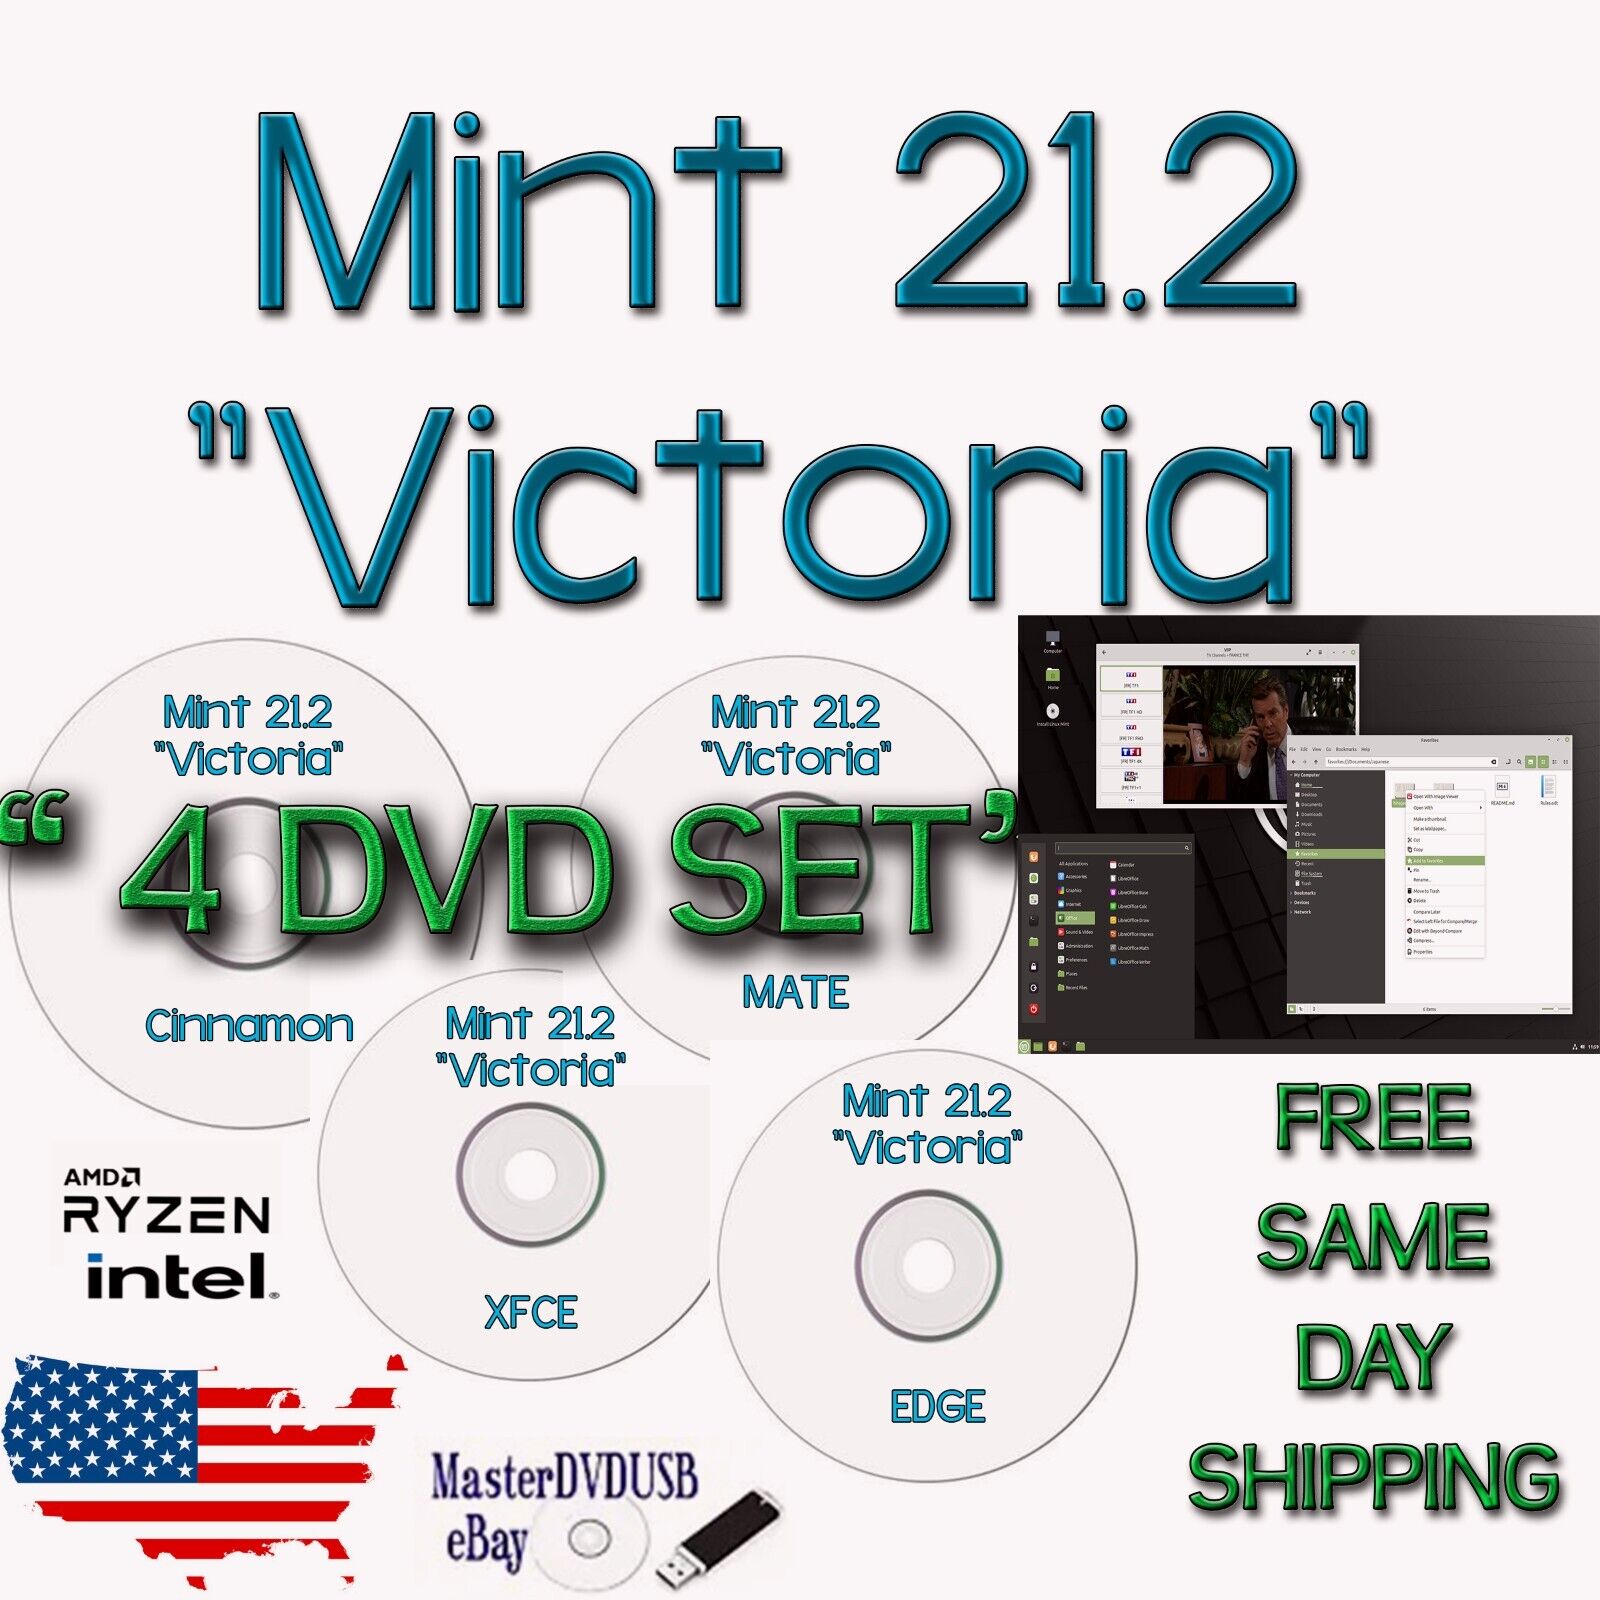 Linux Mint 21.2 “Victoria” 4 DVD Set - 2024 Edition | AAA+ SAME DAY SHIPPING